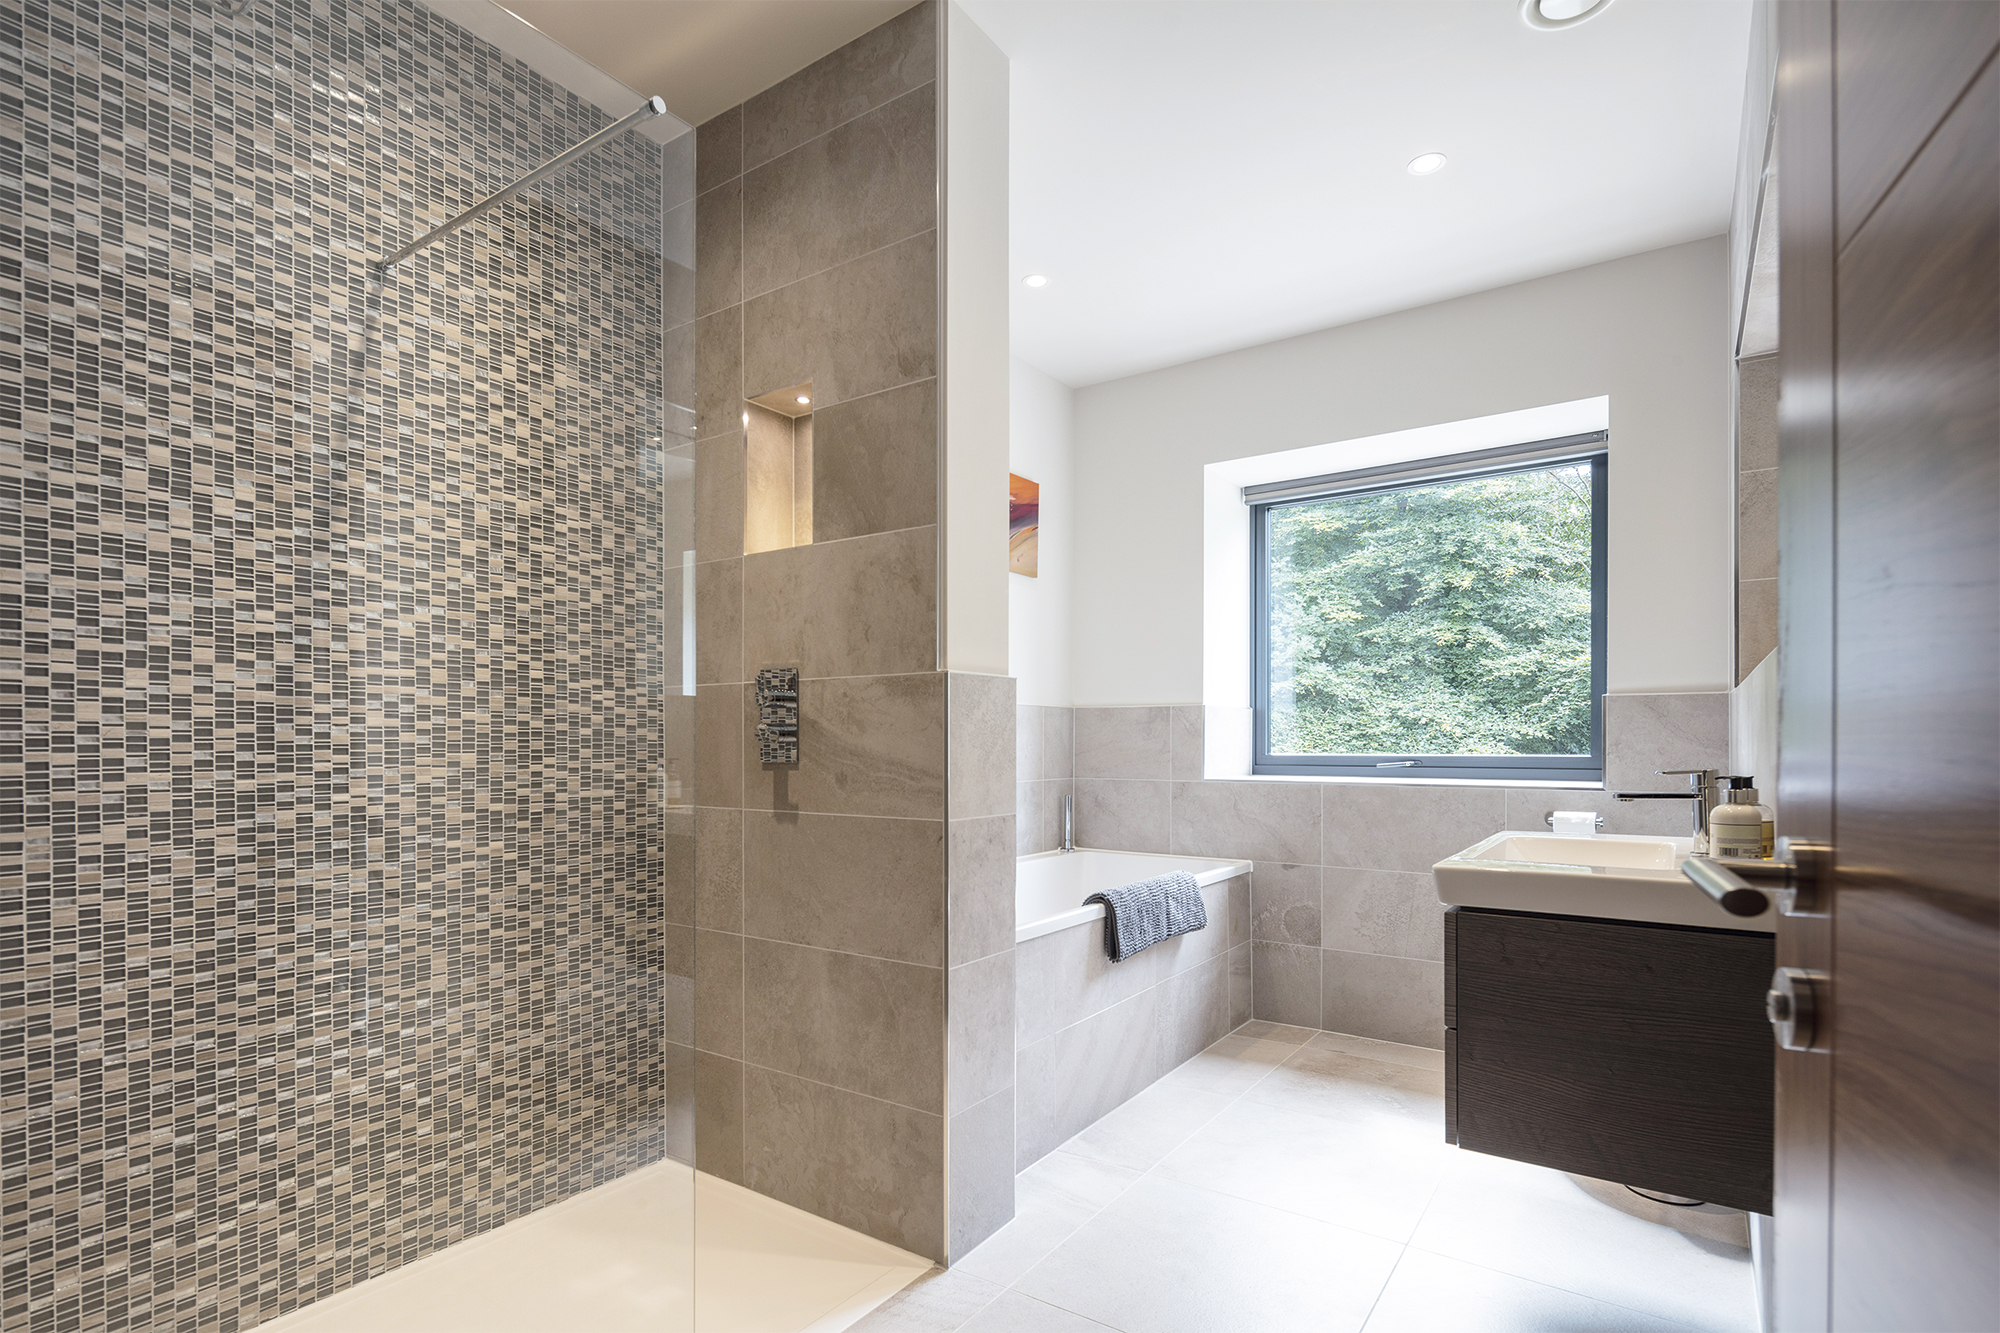 Bathroom with separate walk-in shower in fully integrated smart home